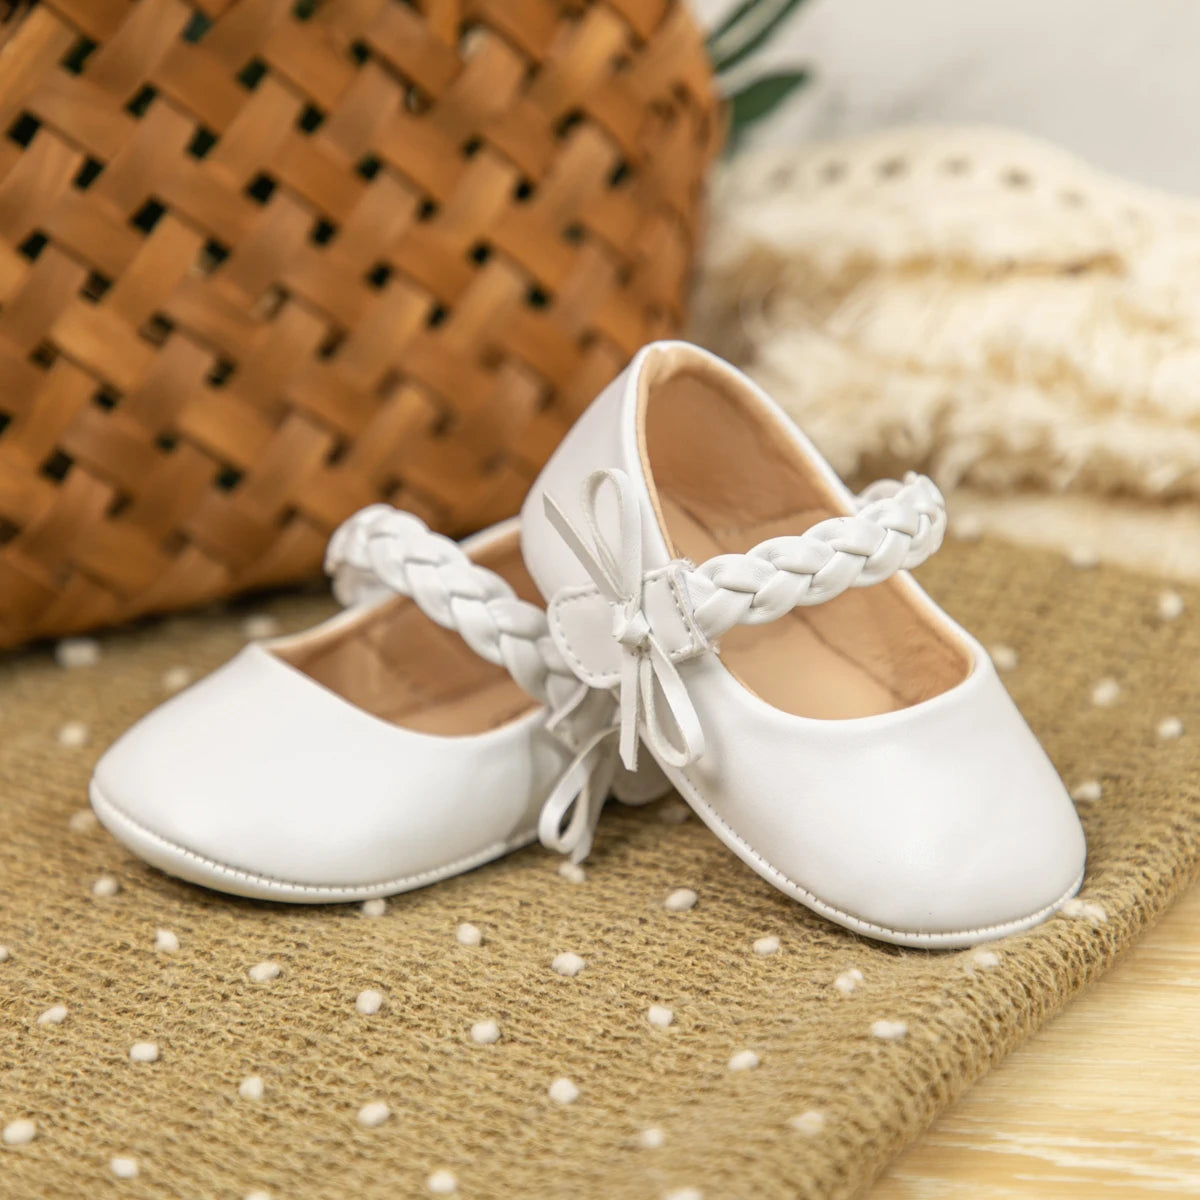 Woven Belt PU Leather Baby Girl Shoes